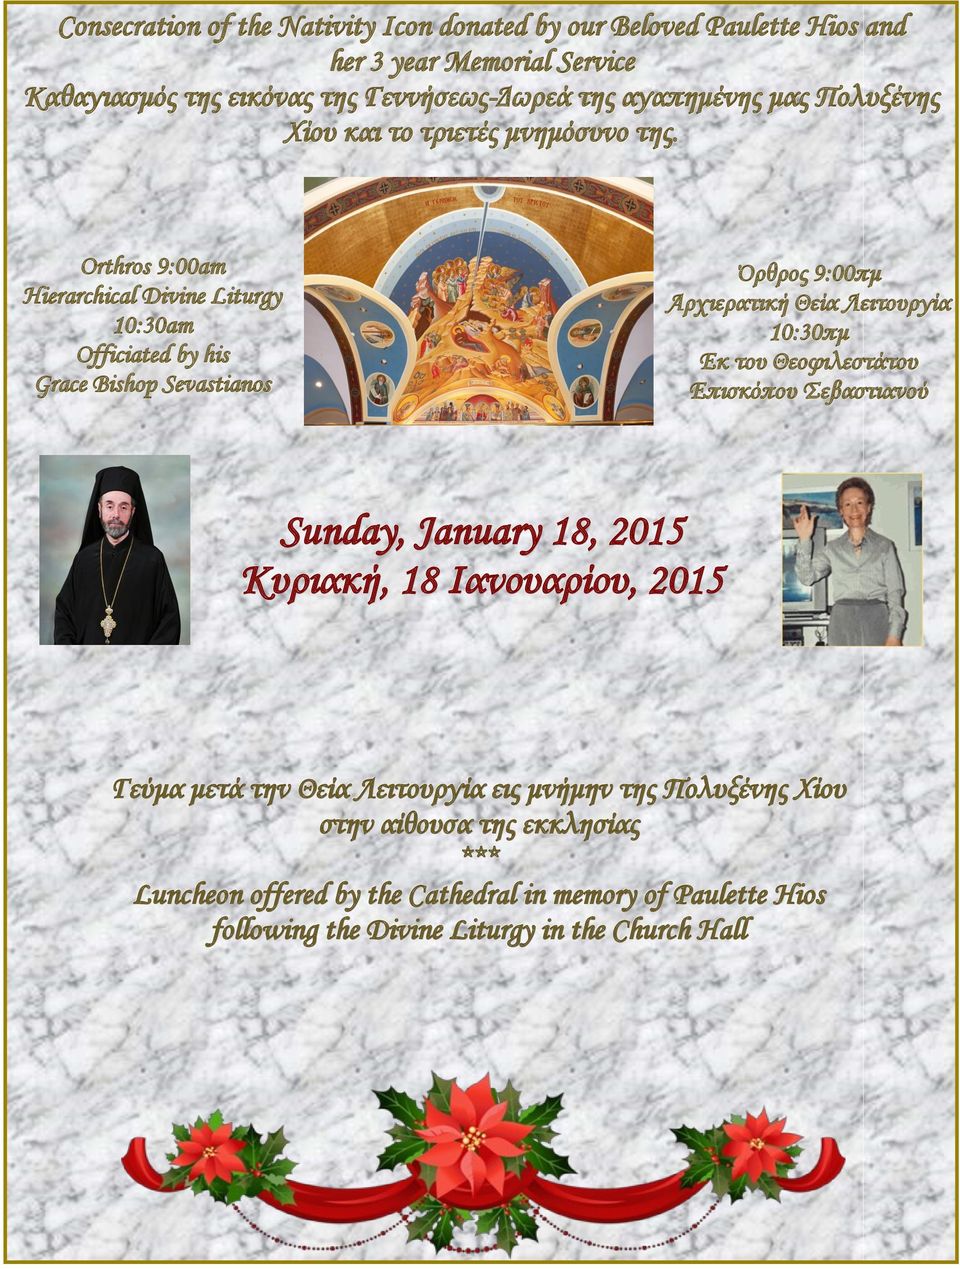 Orthros 9:00am Hierarchical Divine Liturgy 10:30am Officiated by his Grace Bishop Sevastianos Όρθρος 9:009 :00πμ Αρχιερατική Θεία Λειτουργία 10:30 :30πμ Εκ του